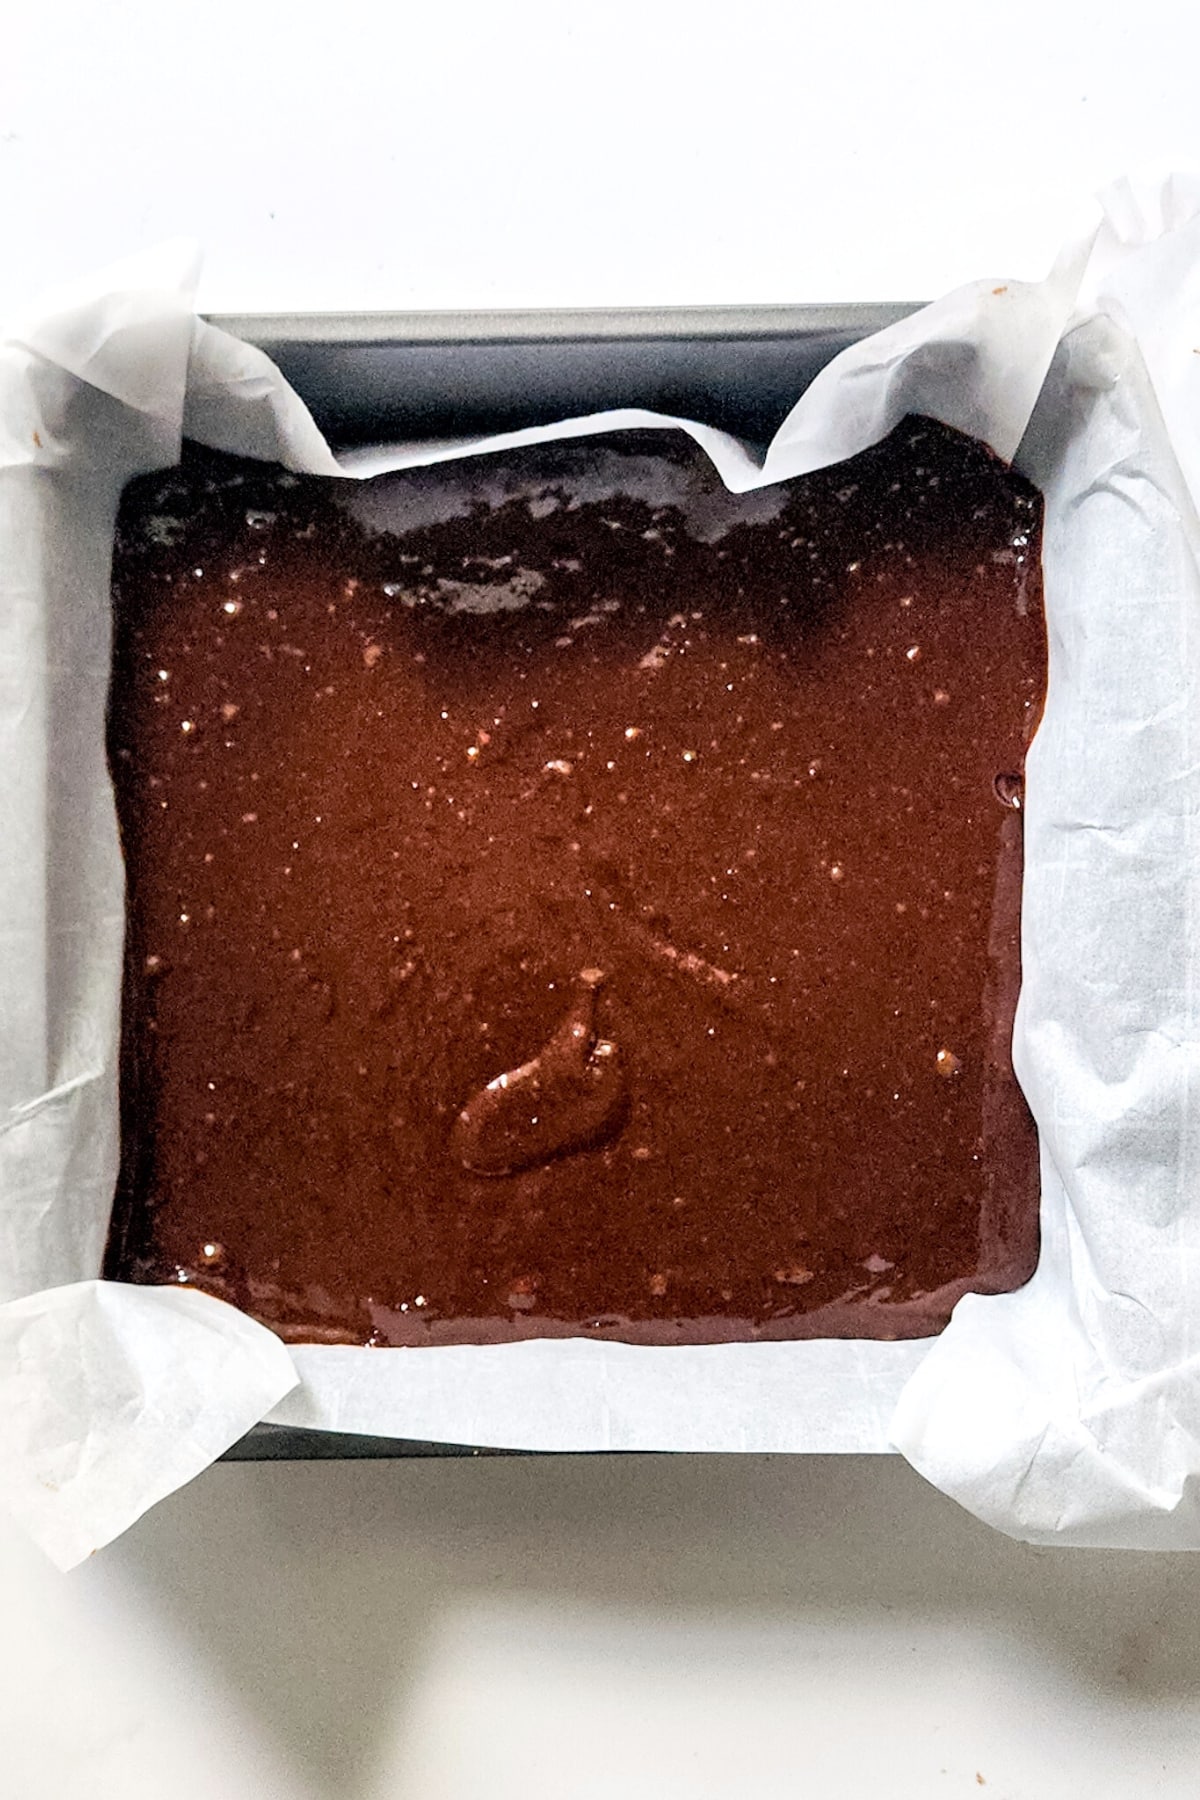 Brownie batter in parchment lined pan.